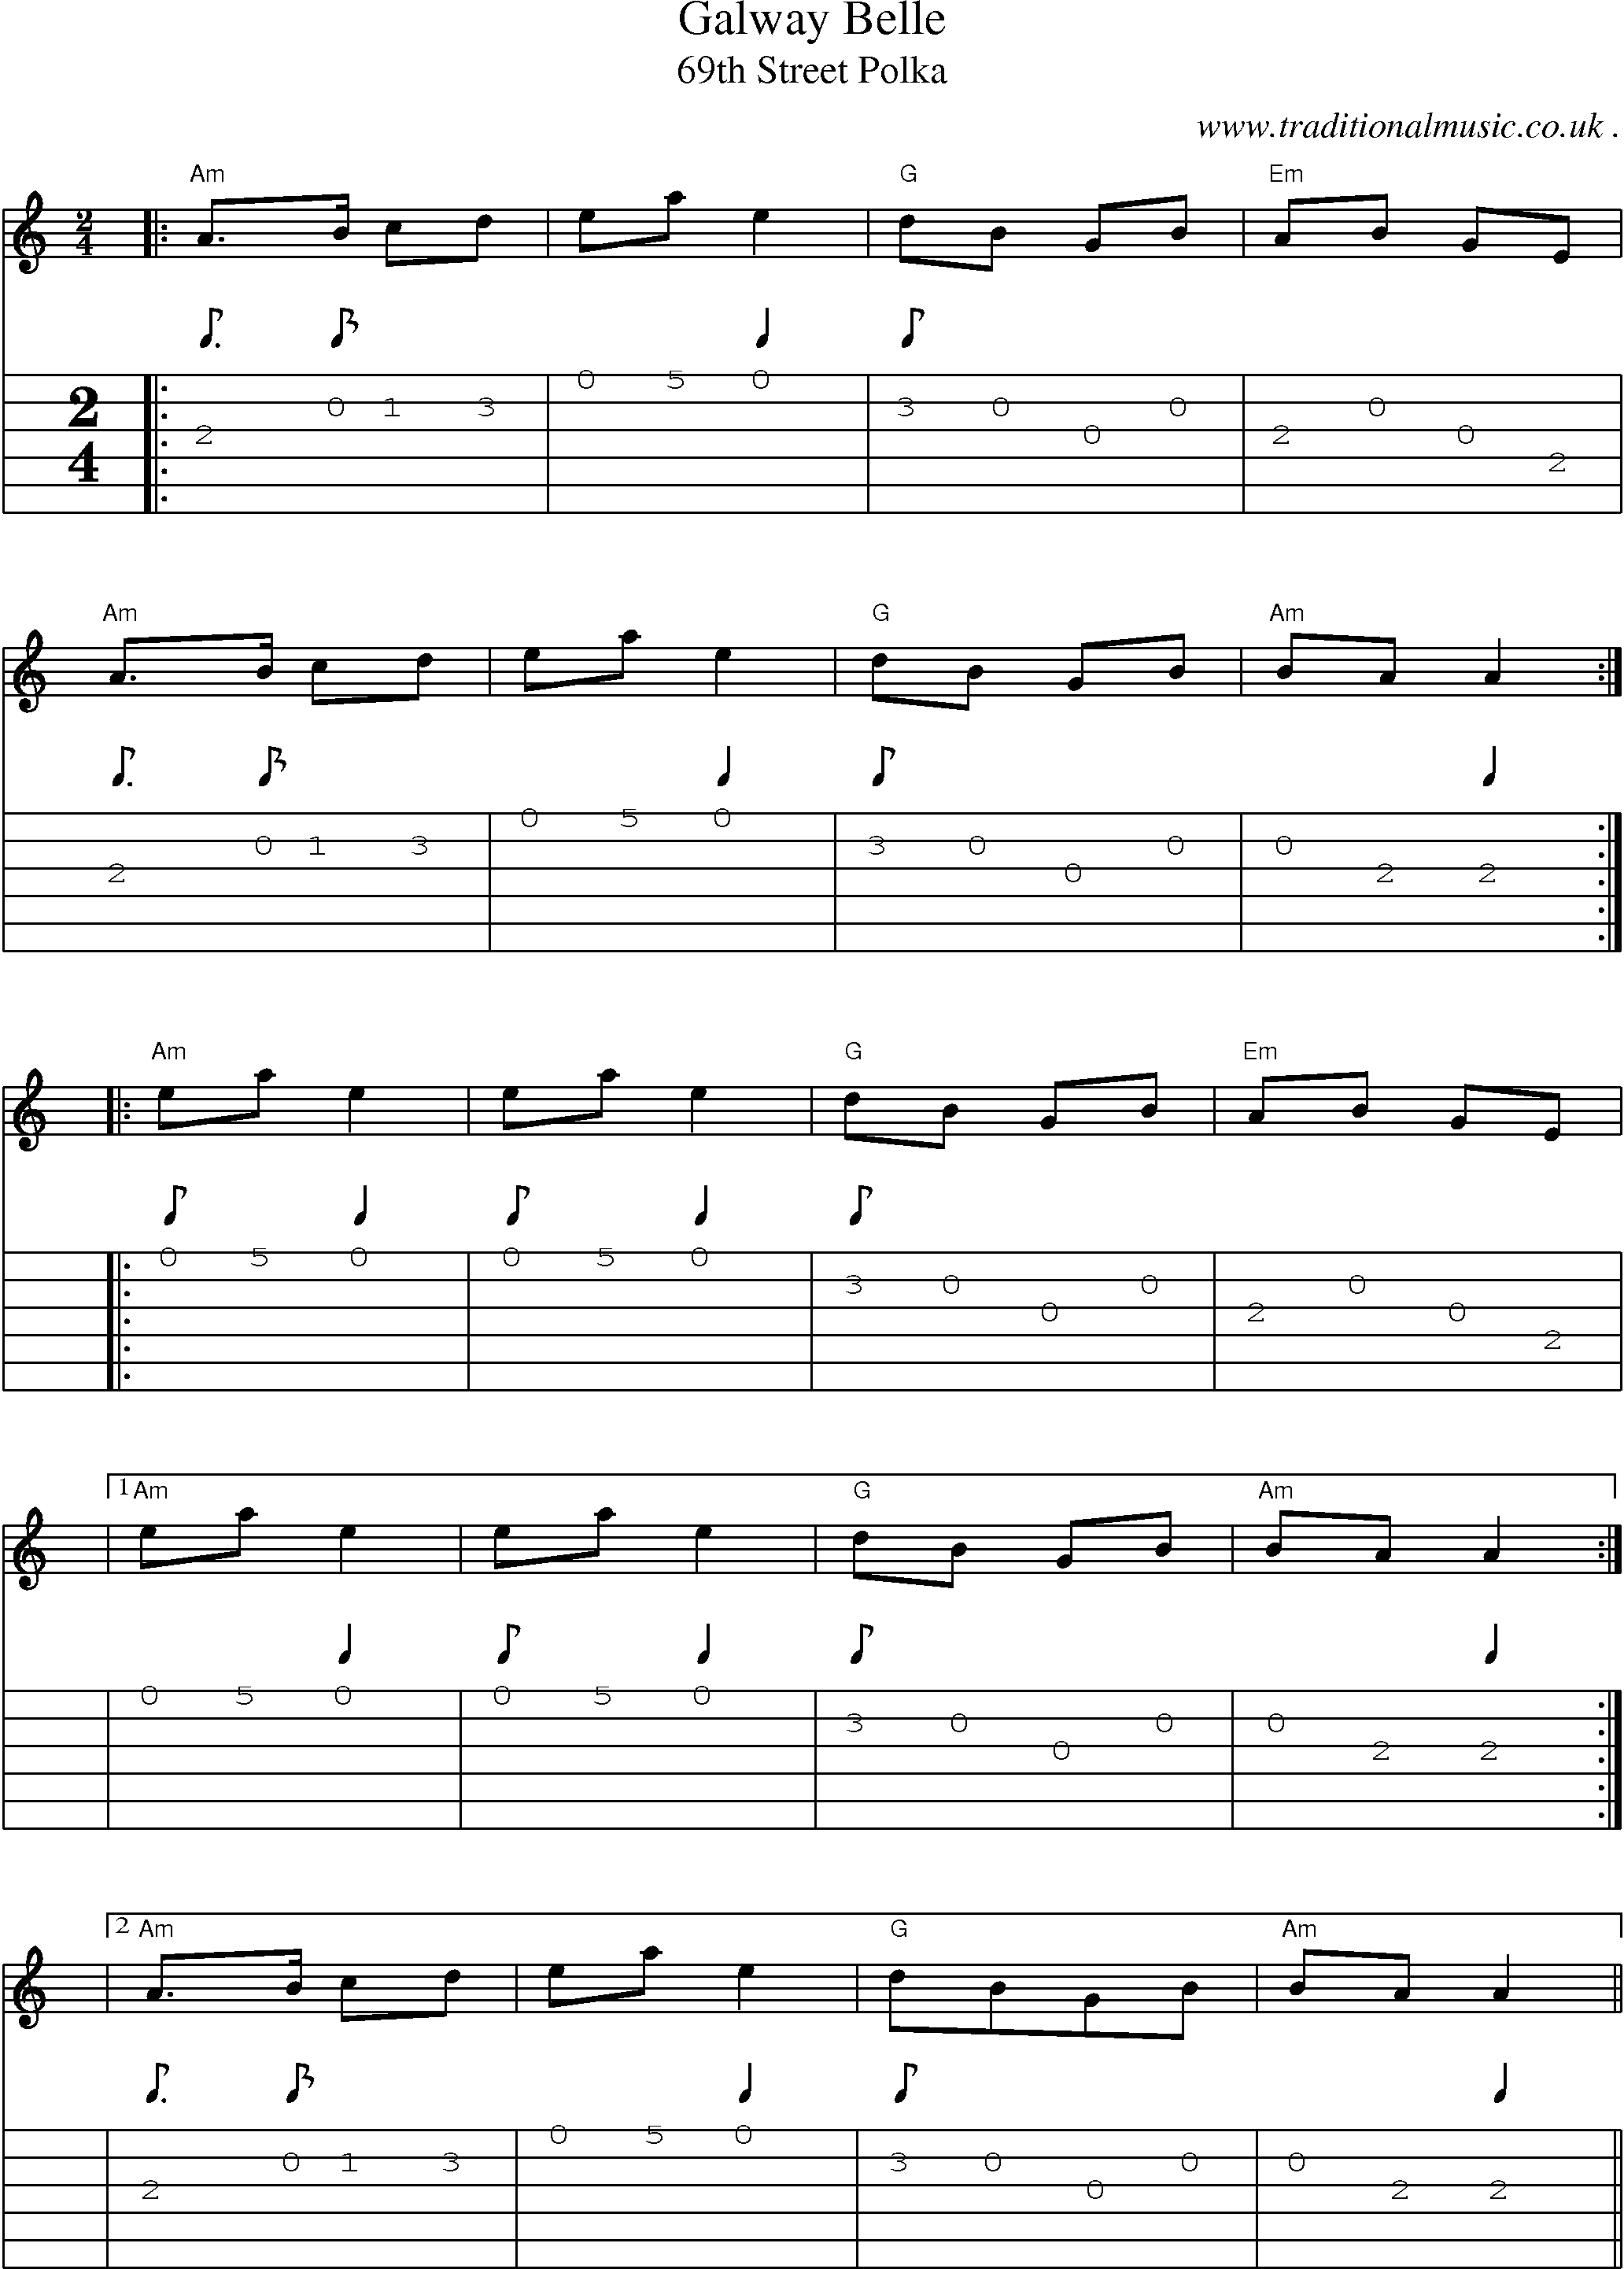 Music Score and Guitar Tabs for Galway Belle 